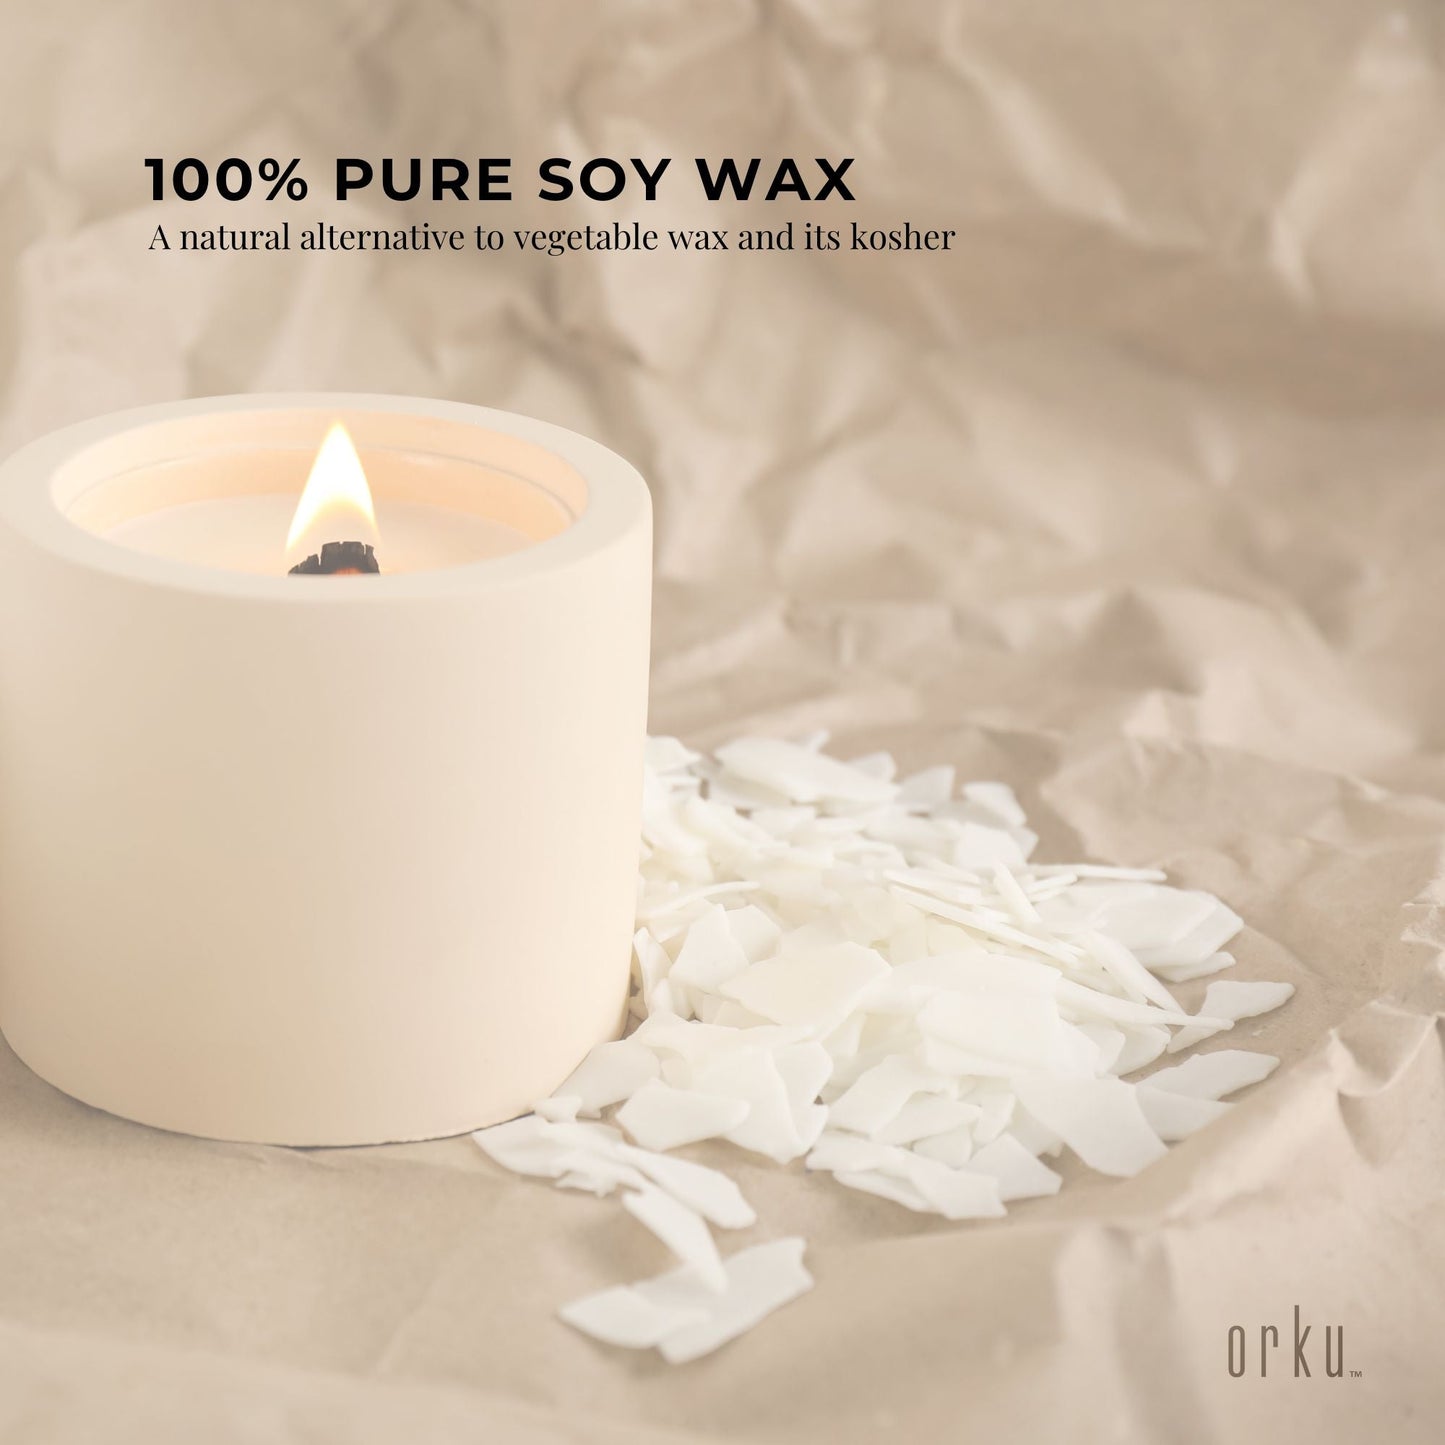 400g Golden 464 Soy Wax Flakes - 100% Pure Natural DIY Candle Melts Chips